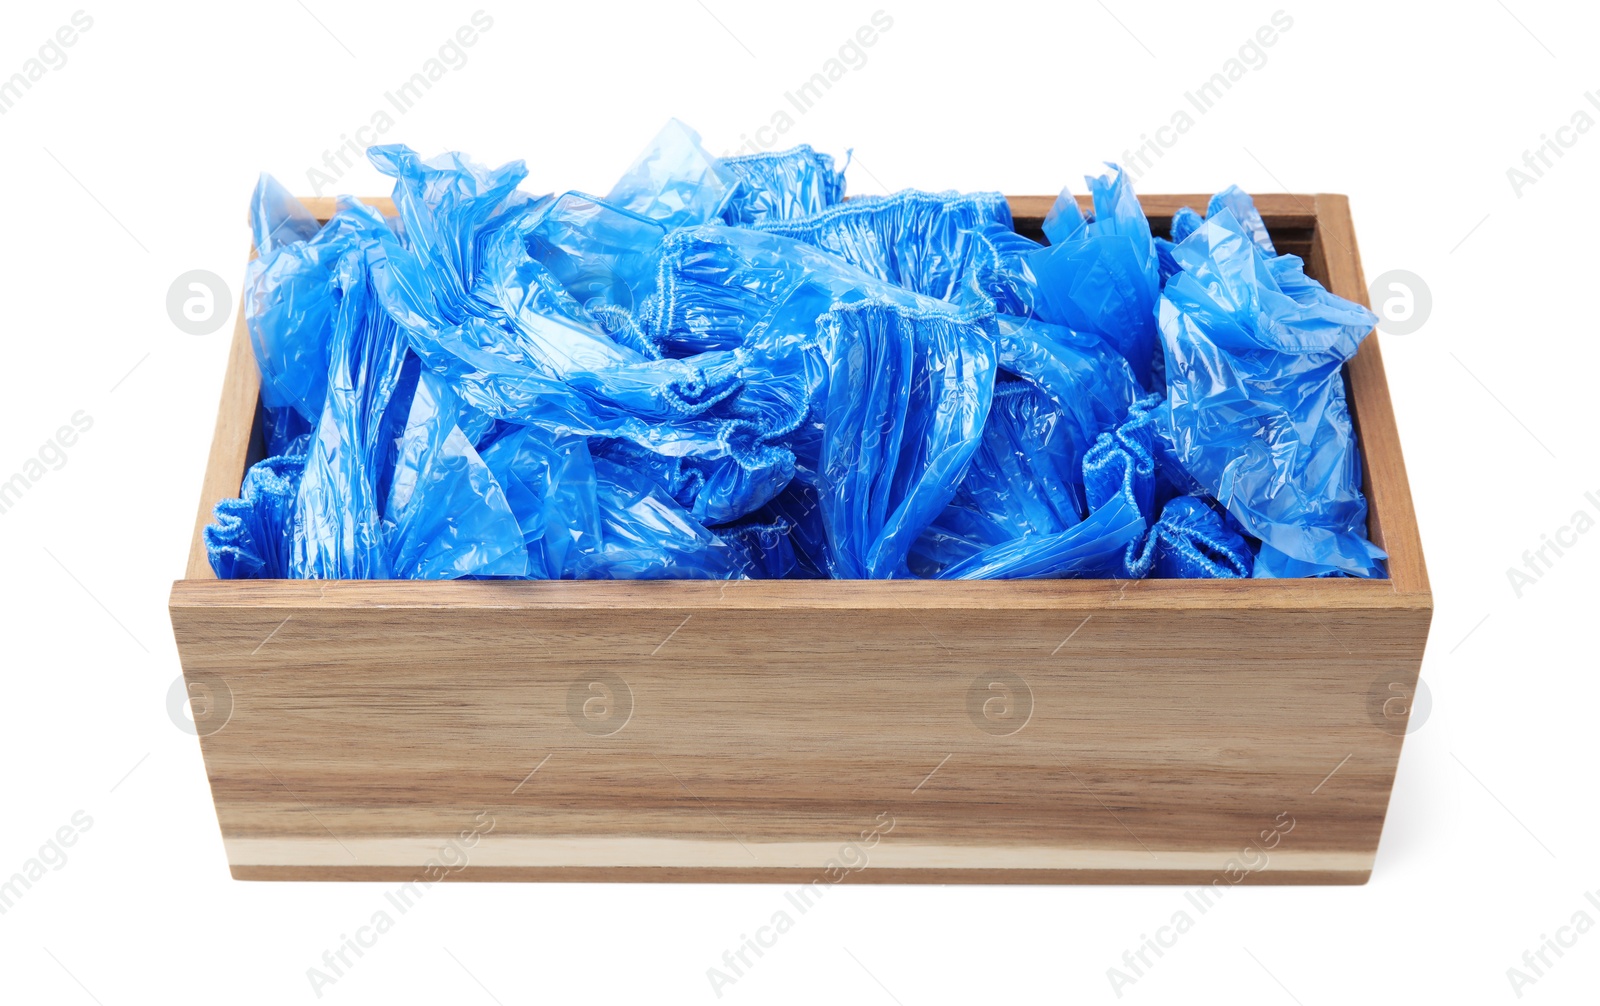 Photo of Blue medical shoe covers in wooden crate isolated on white